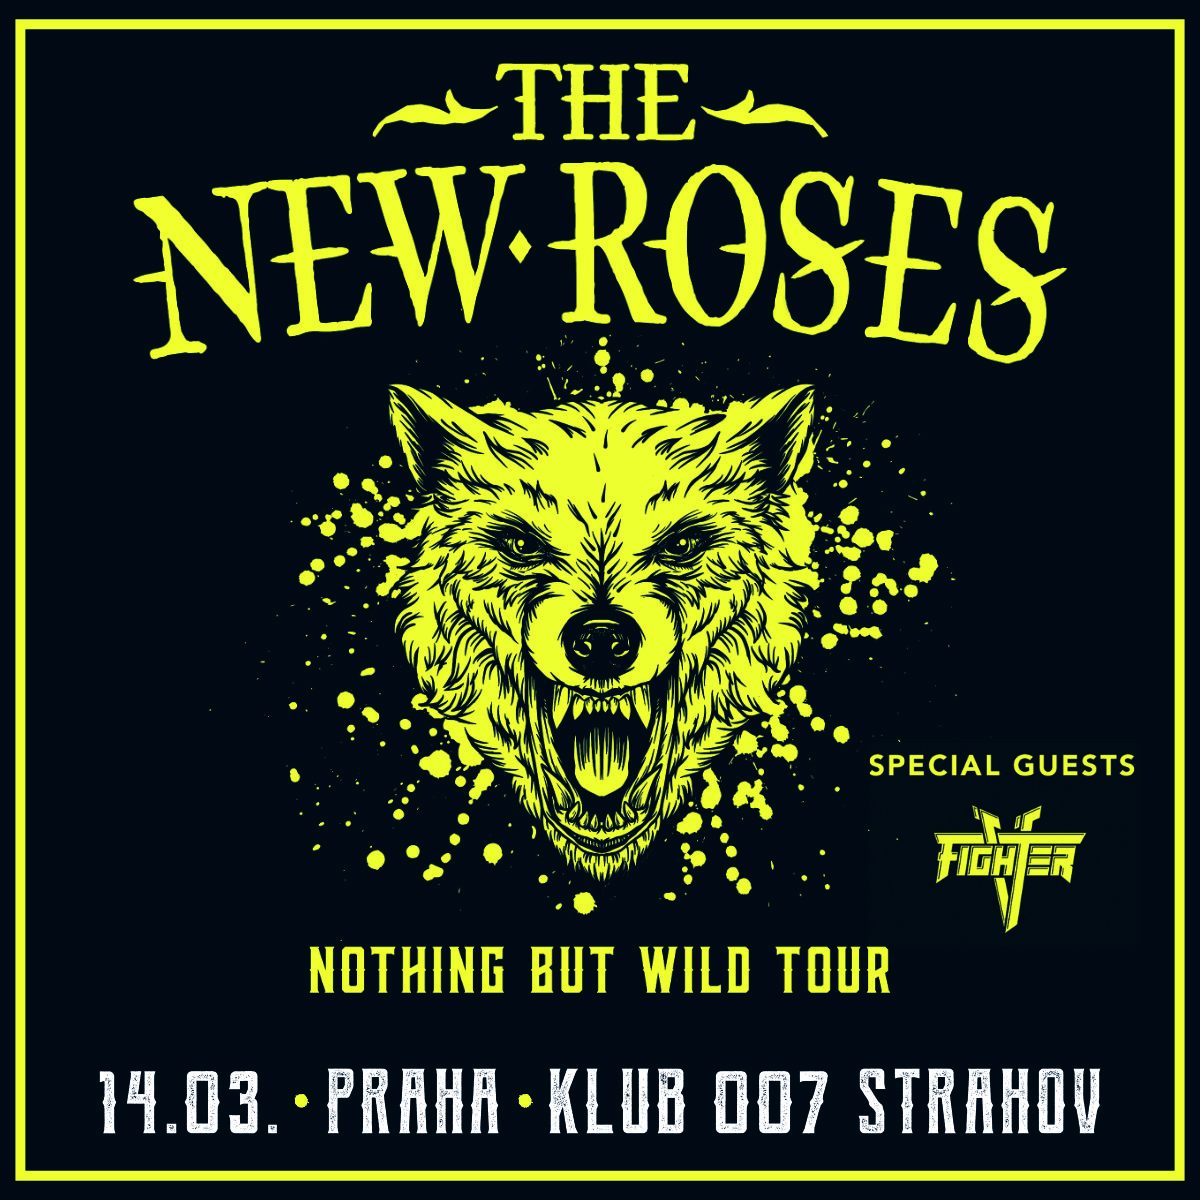 The new roses. The New Roses группа. The New Roses_2019_nothing but Wild. The New Roses-2019 "nothing but Wild фото. The New Roses - 2019 - nothing but Wild [FLAC].